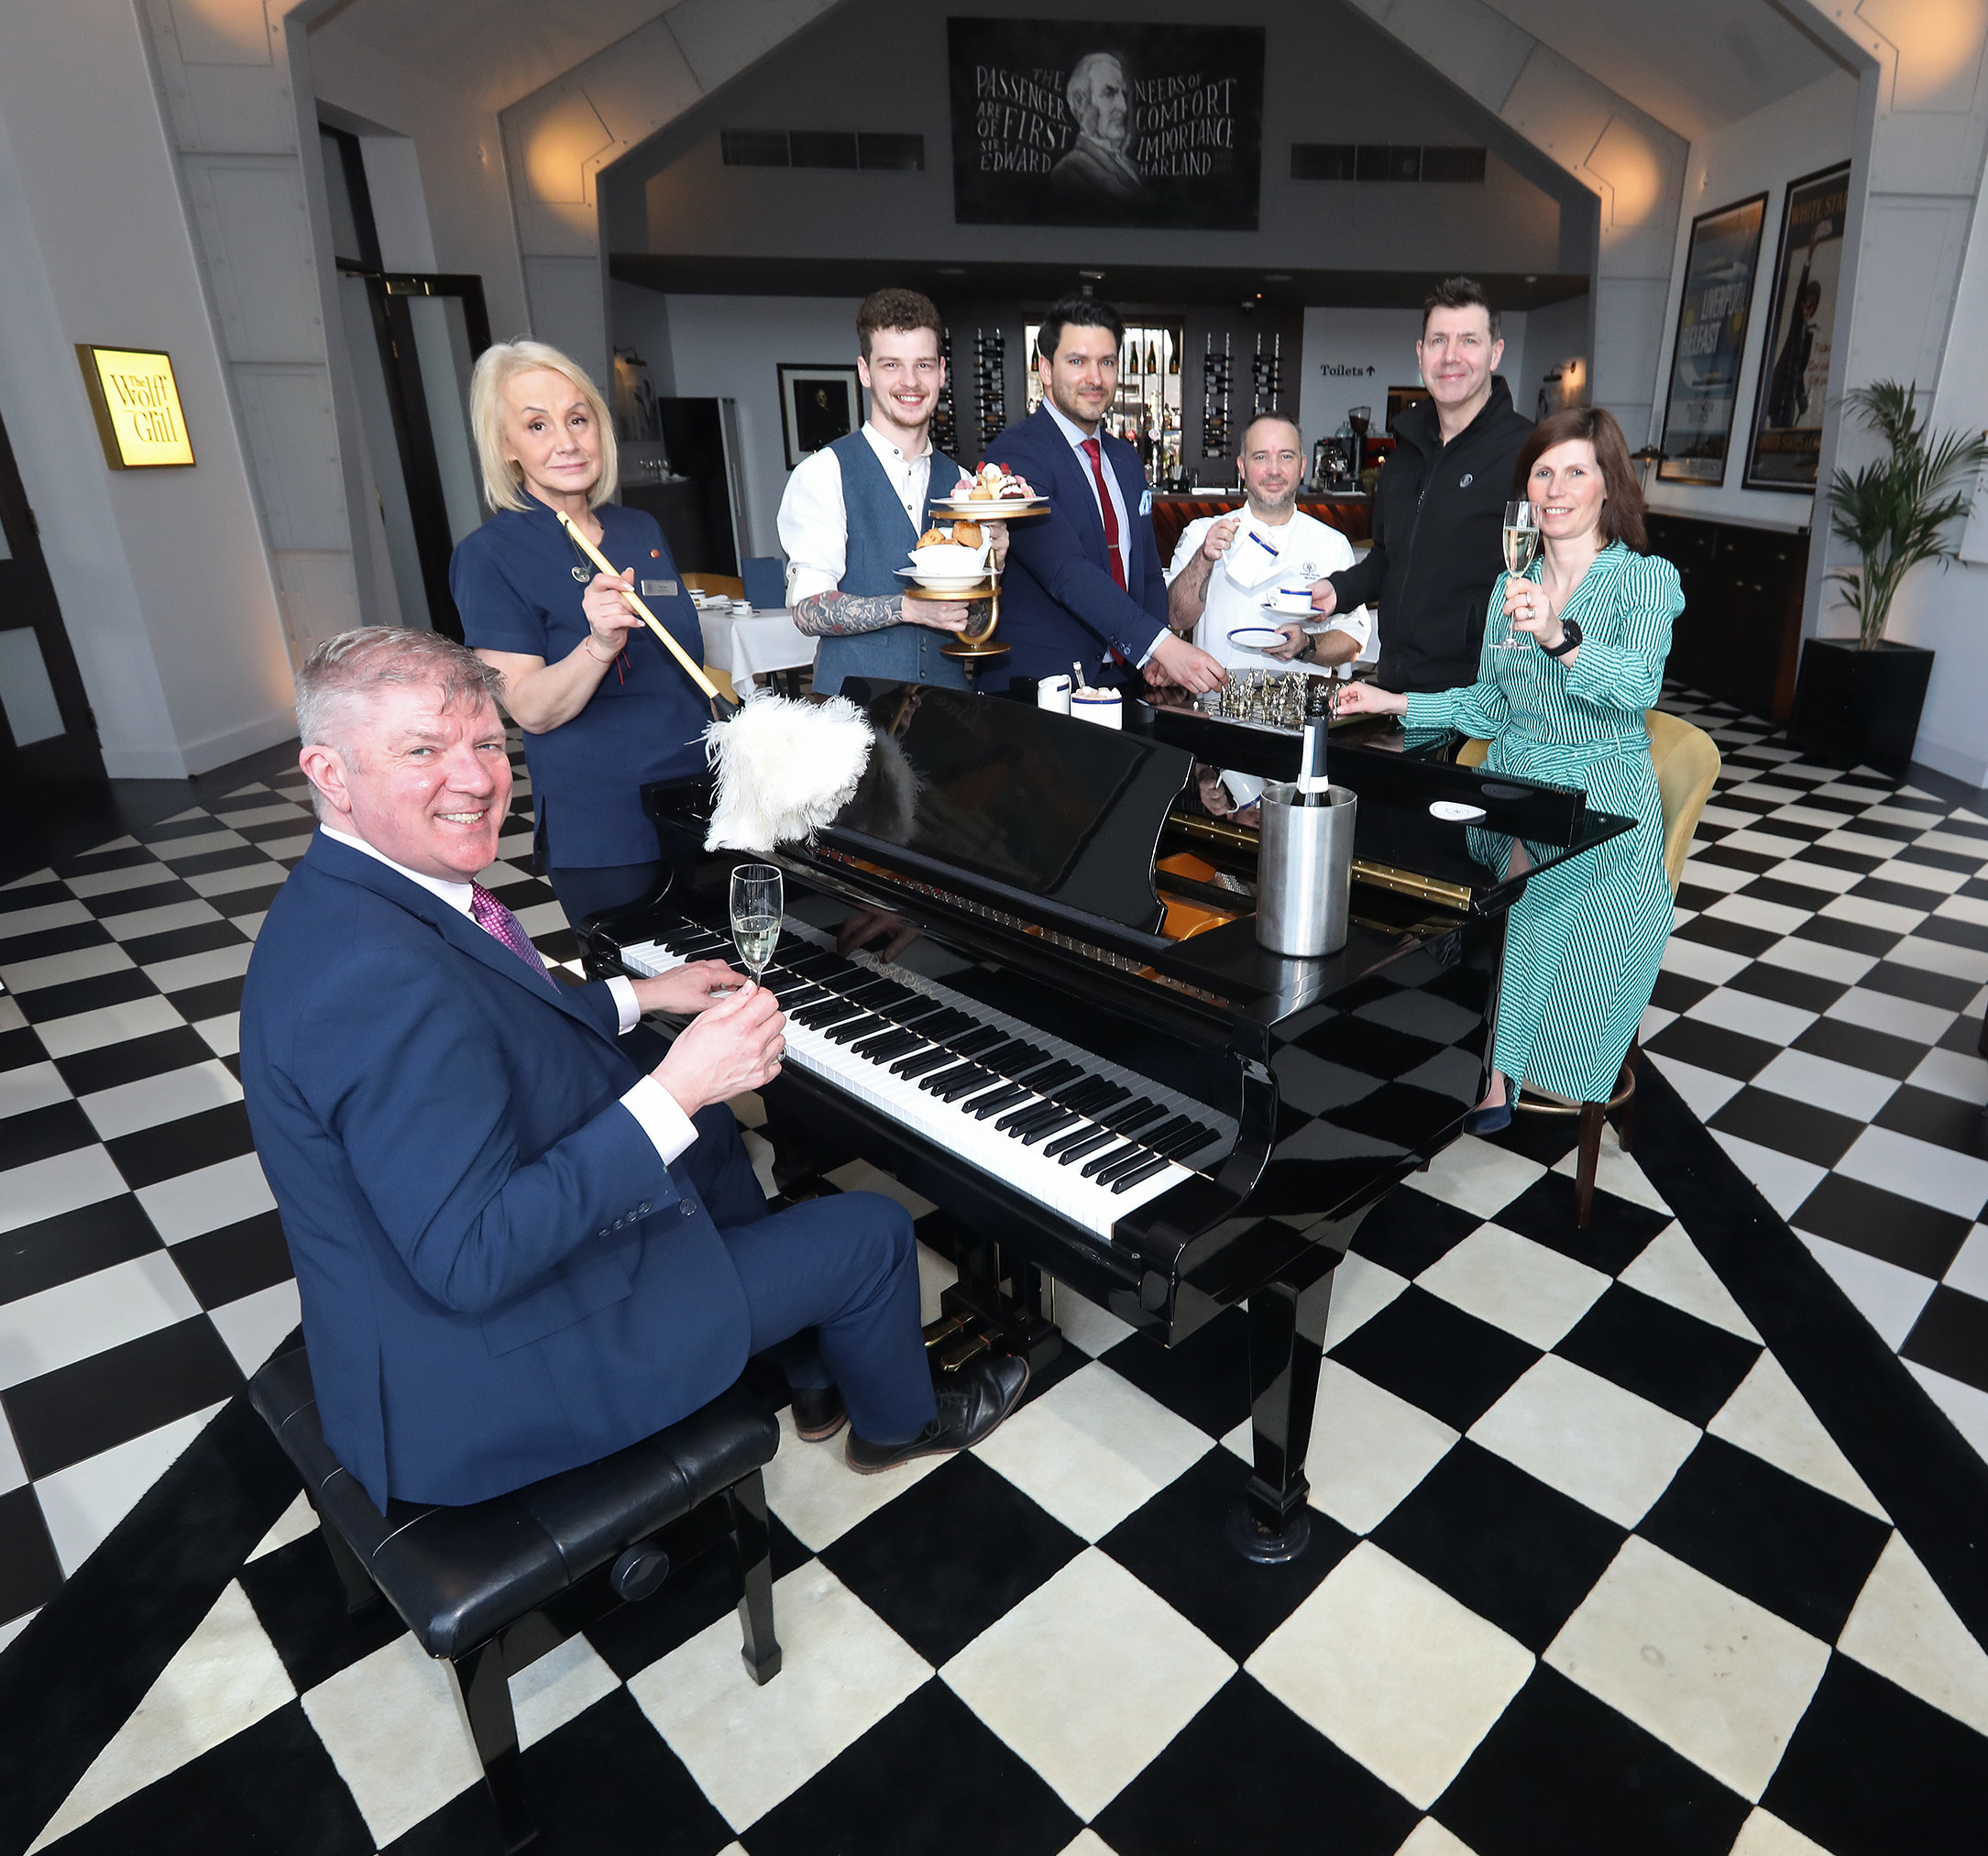 The multi award winning Titanic Hotel Belfast has retained the title of Northern Ireland’s Leading Hotel for the seventh year in a row